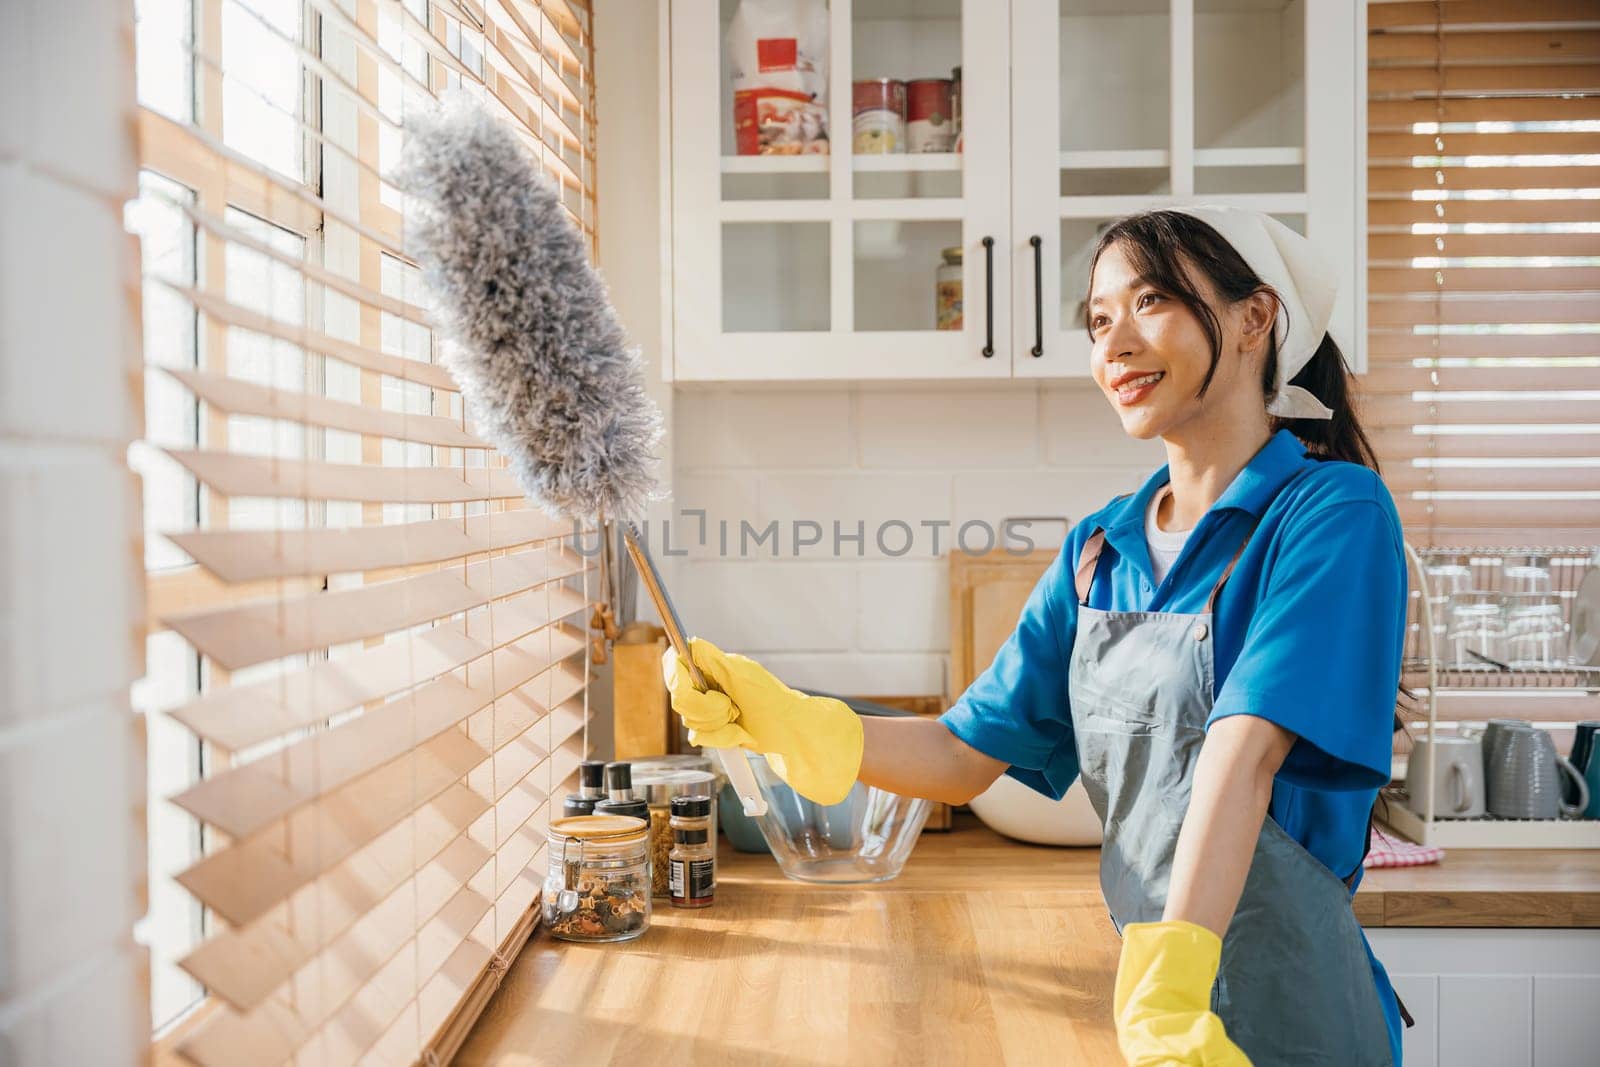 Housework happiness, Asian woman smiles while dusting window blinds. Her occupation involves routine cleaning ensuring a modern clean home. Portrait showing hygiene and cleanliness. whisk by Sorapop